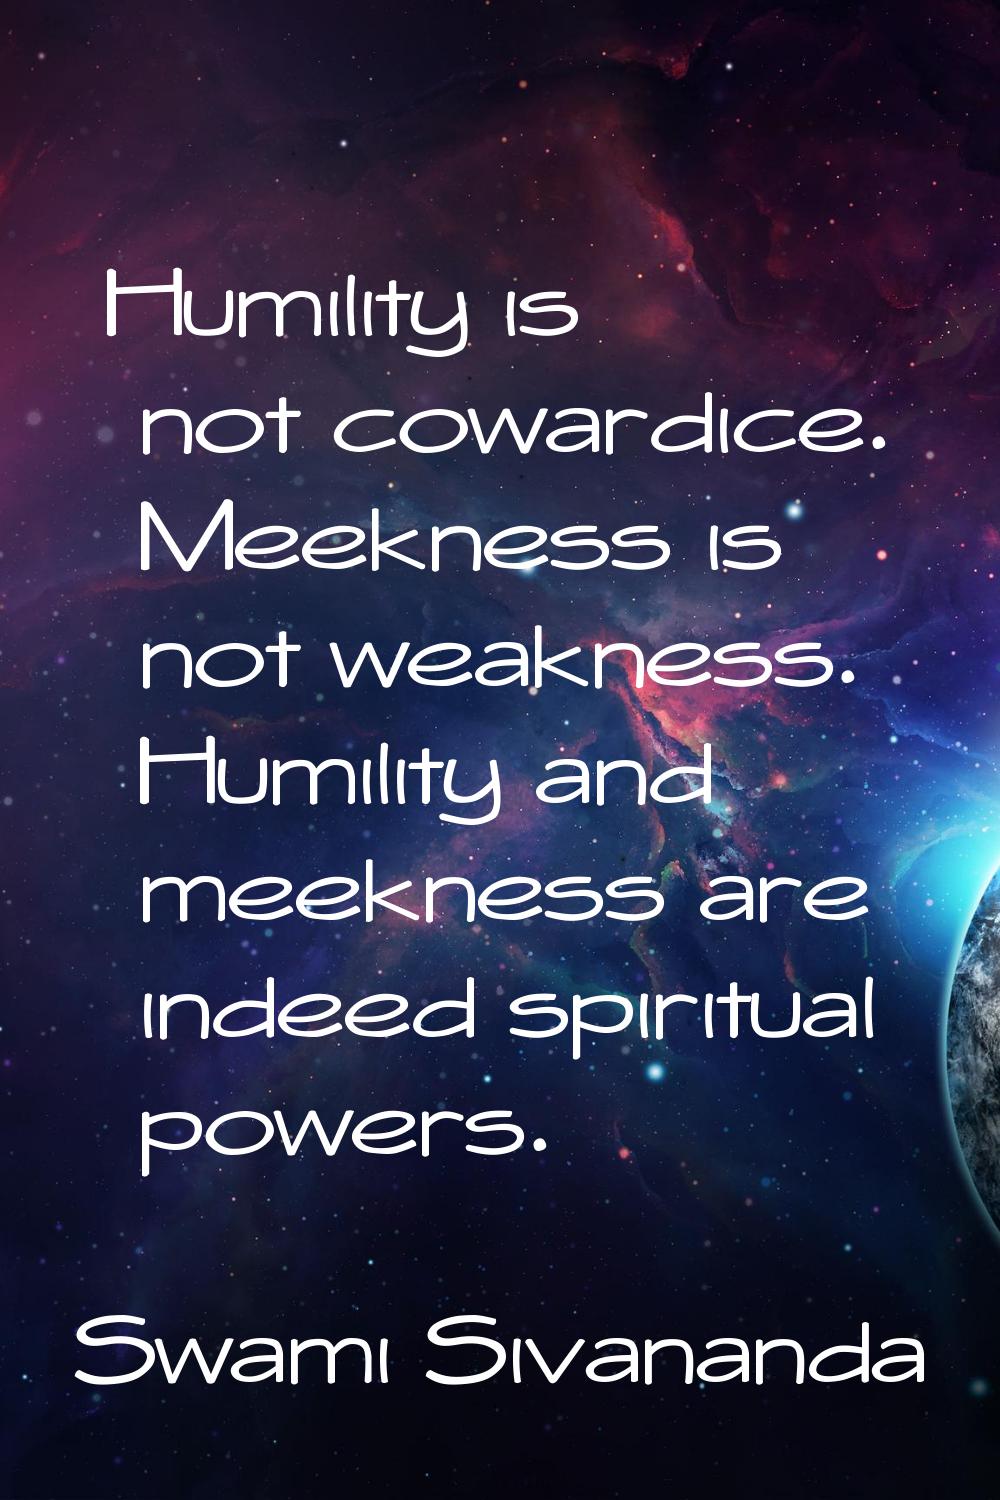 Humility is not cowardice. Meekness is not weakness. Humility and meekness are indeed spiritual pow